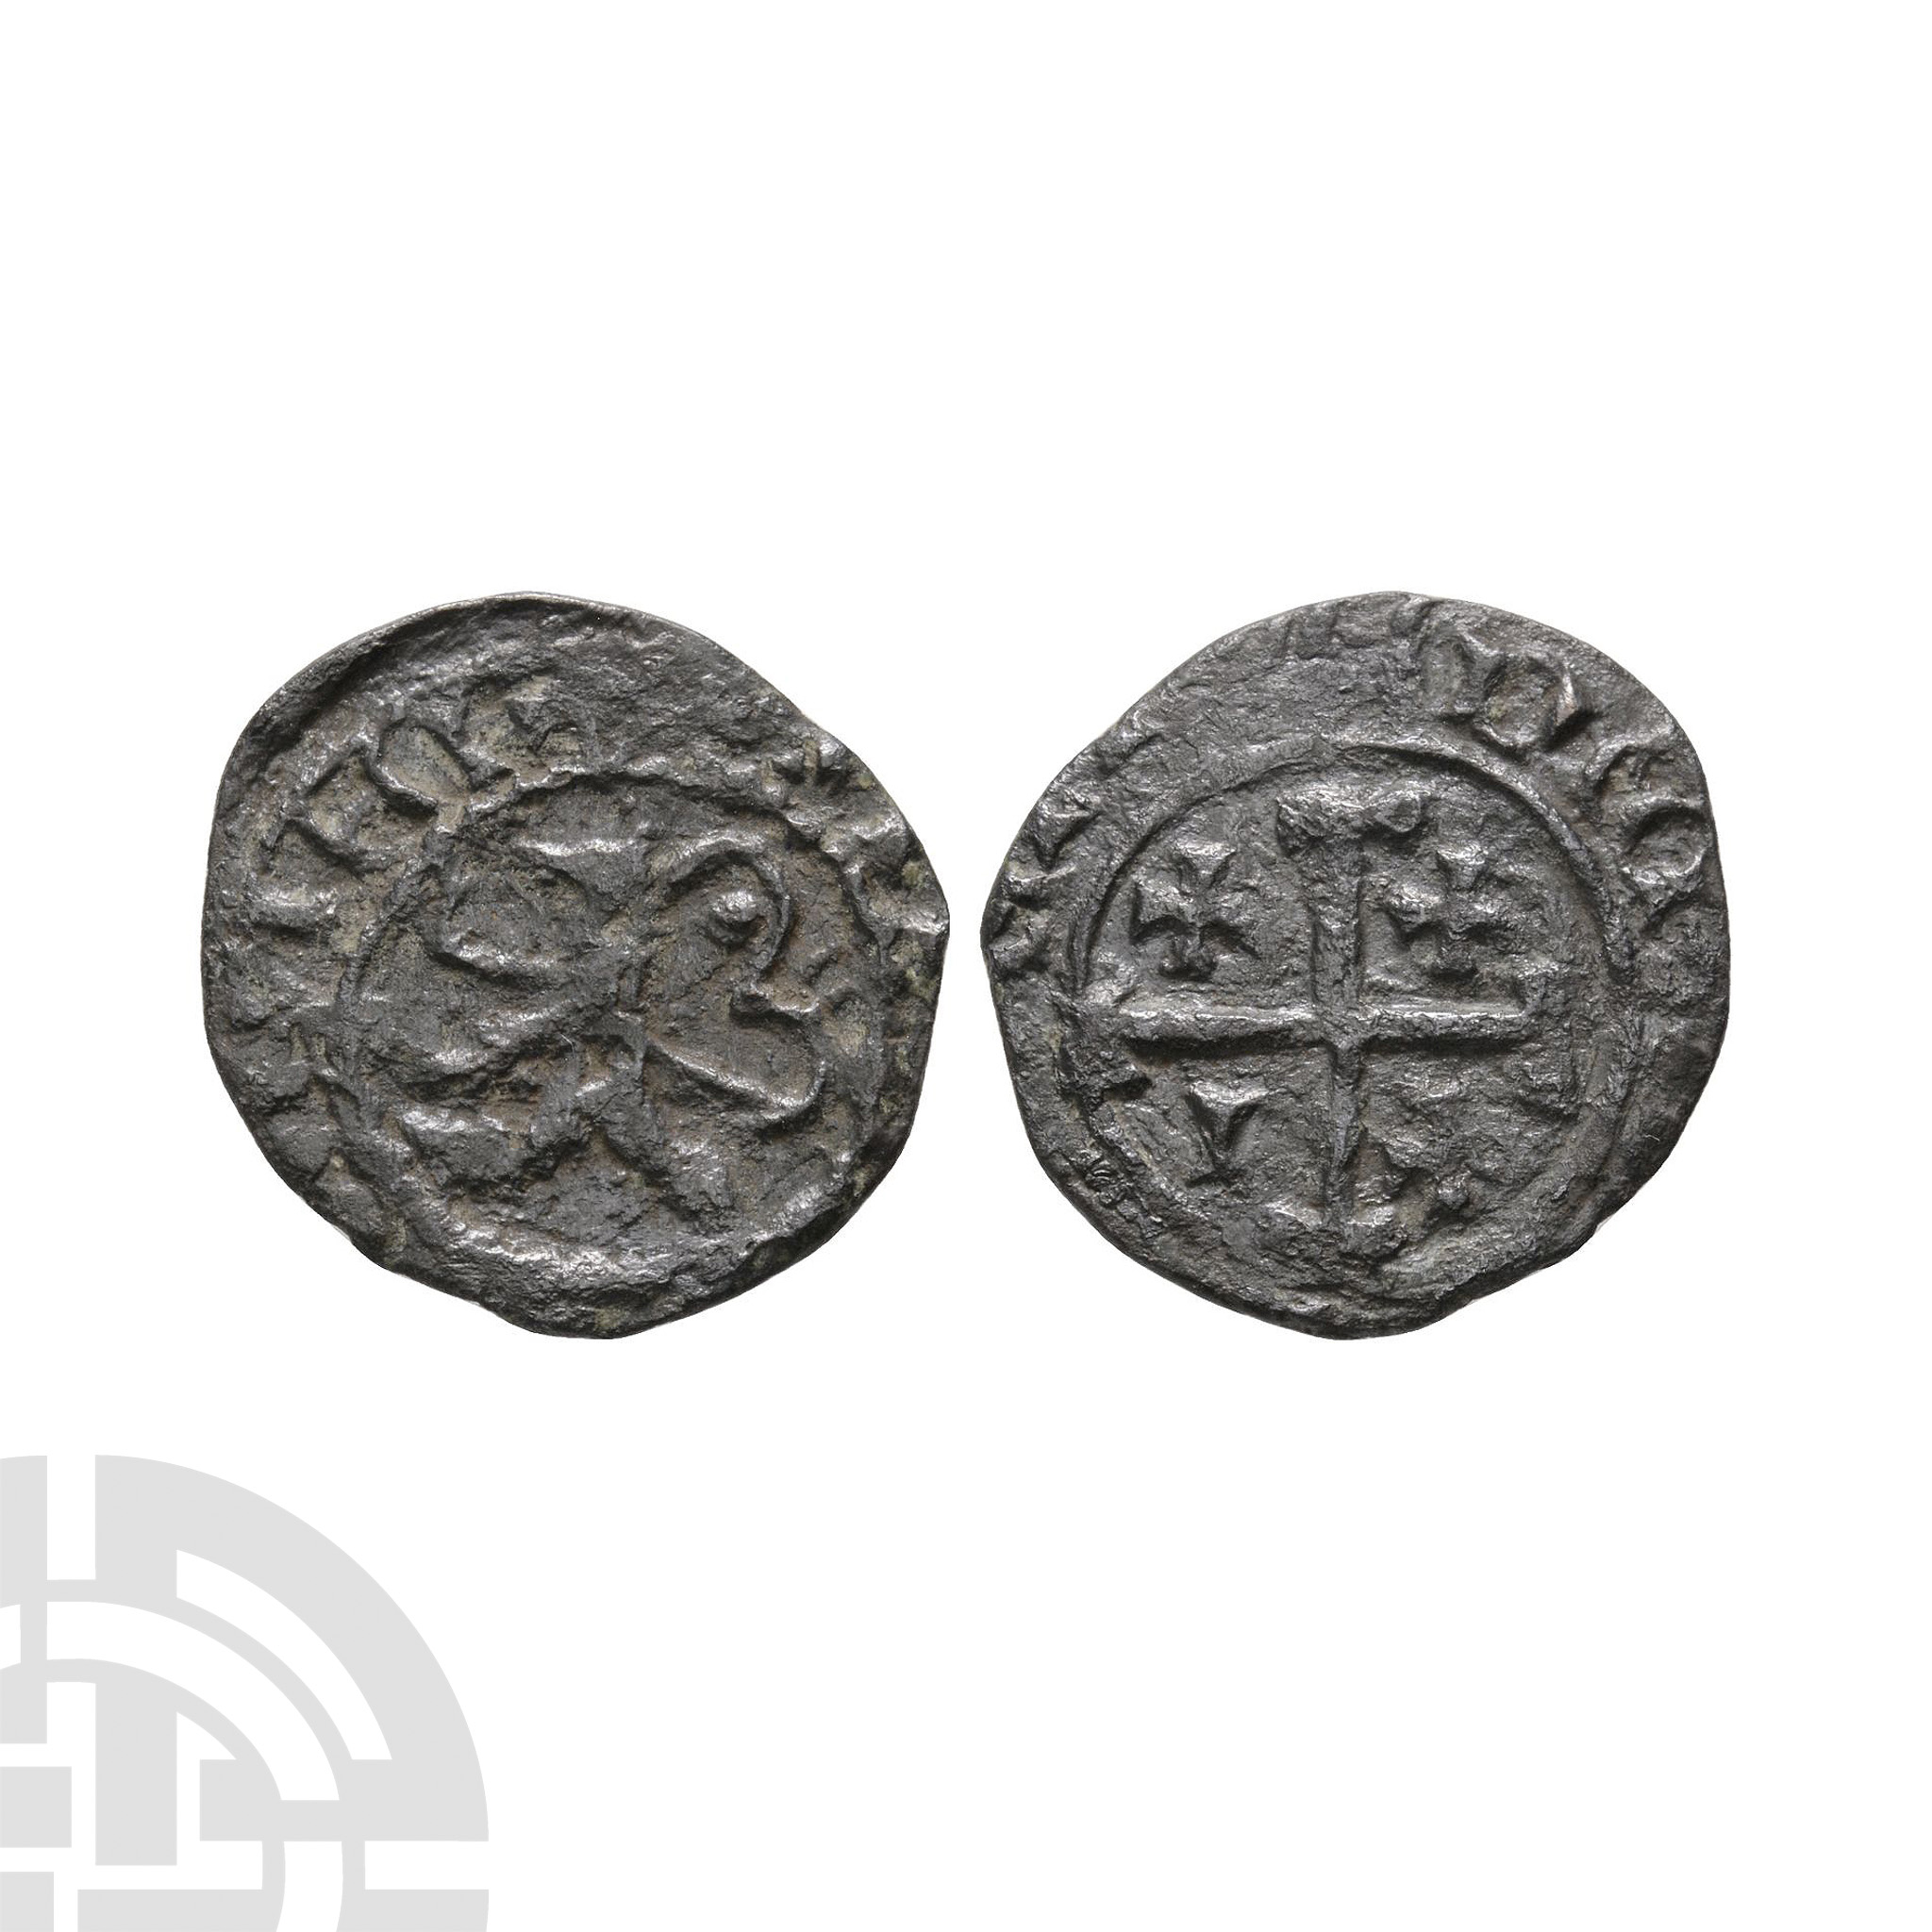 World Coins - Crusader Issues - Lusignan Kingdom of Cyprus - Janus - Unpublished AE Billon Sixain